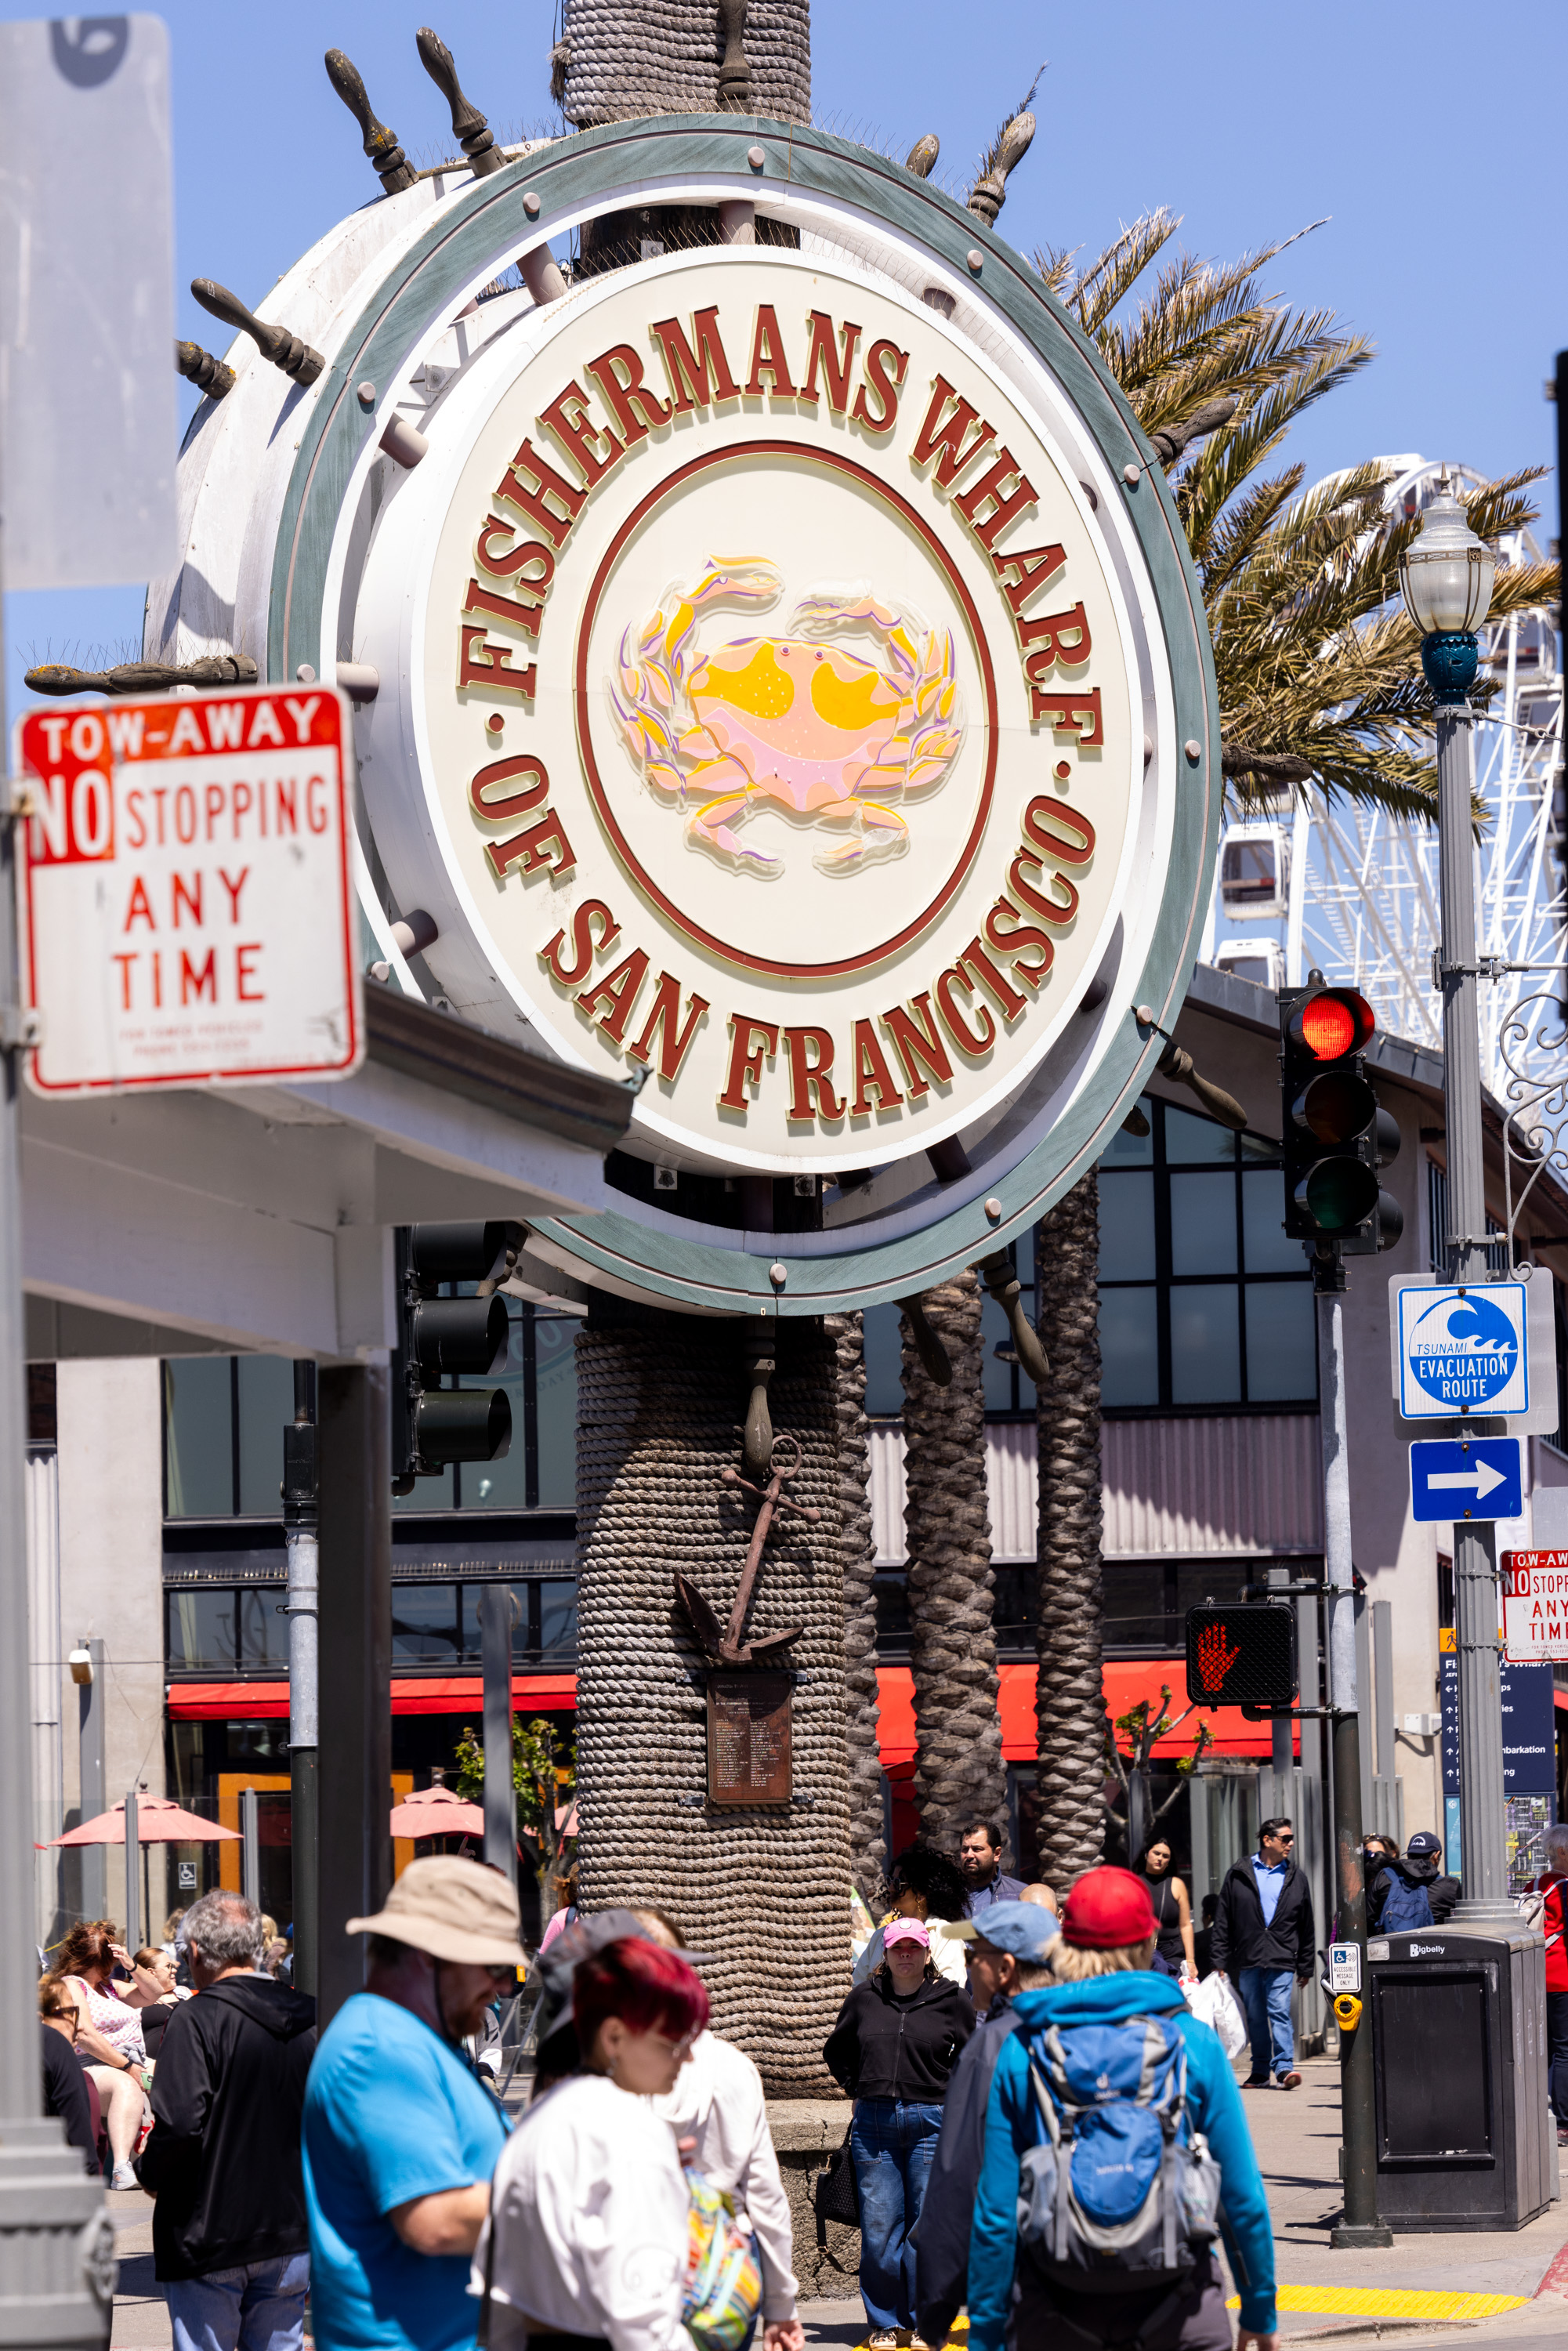 The image shows a busy street scene at Fisherman's Wharf, San Francisco, with a large circular sign and a crowd of people walking beneath it. Nearby, there's a &quot;No Stopping Any Time&quot; sign.